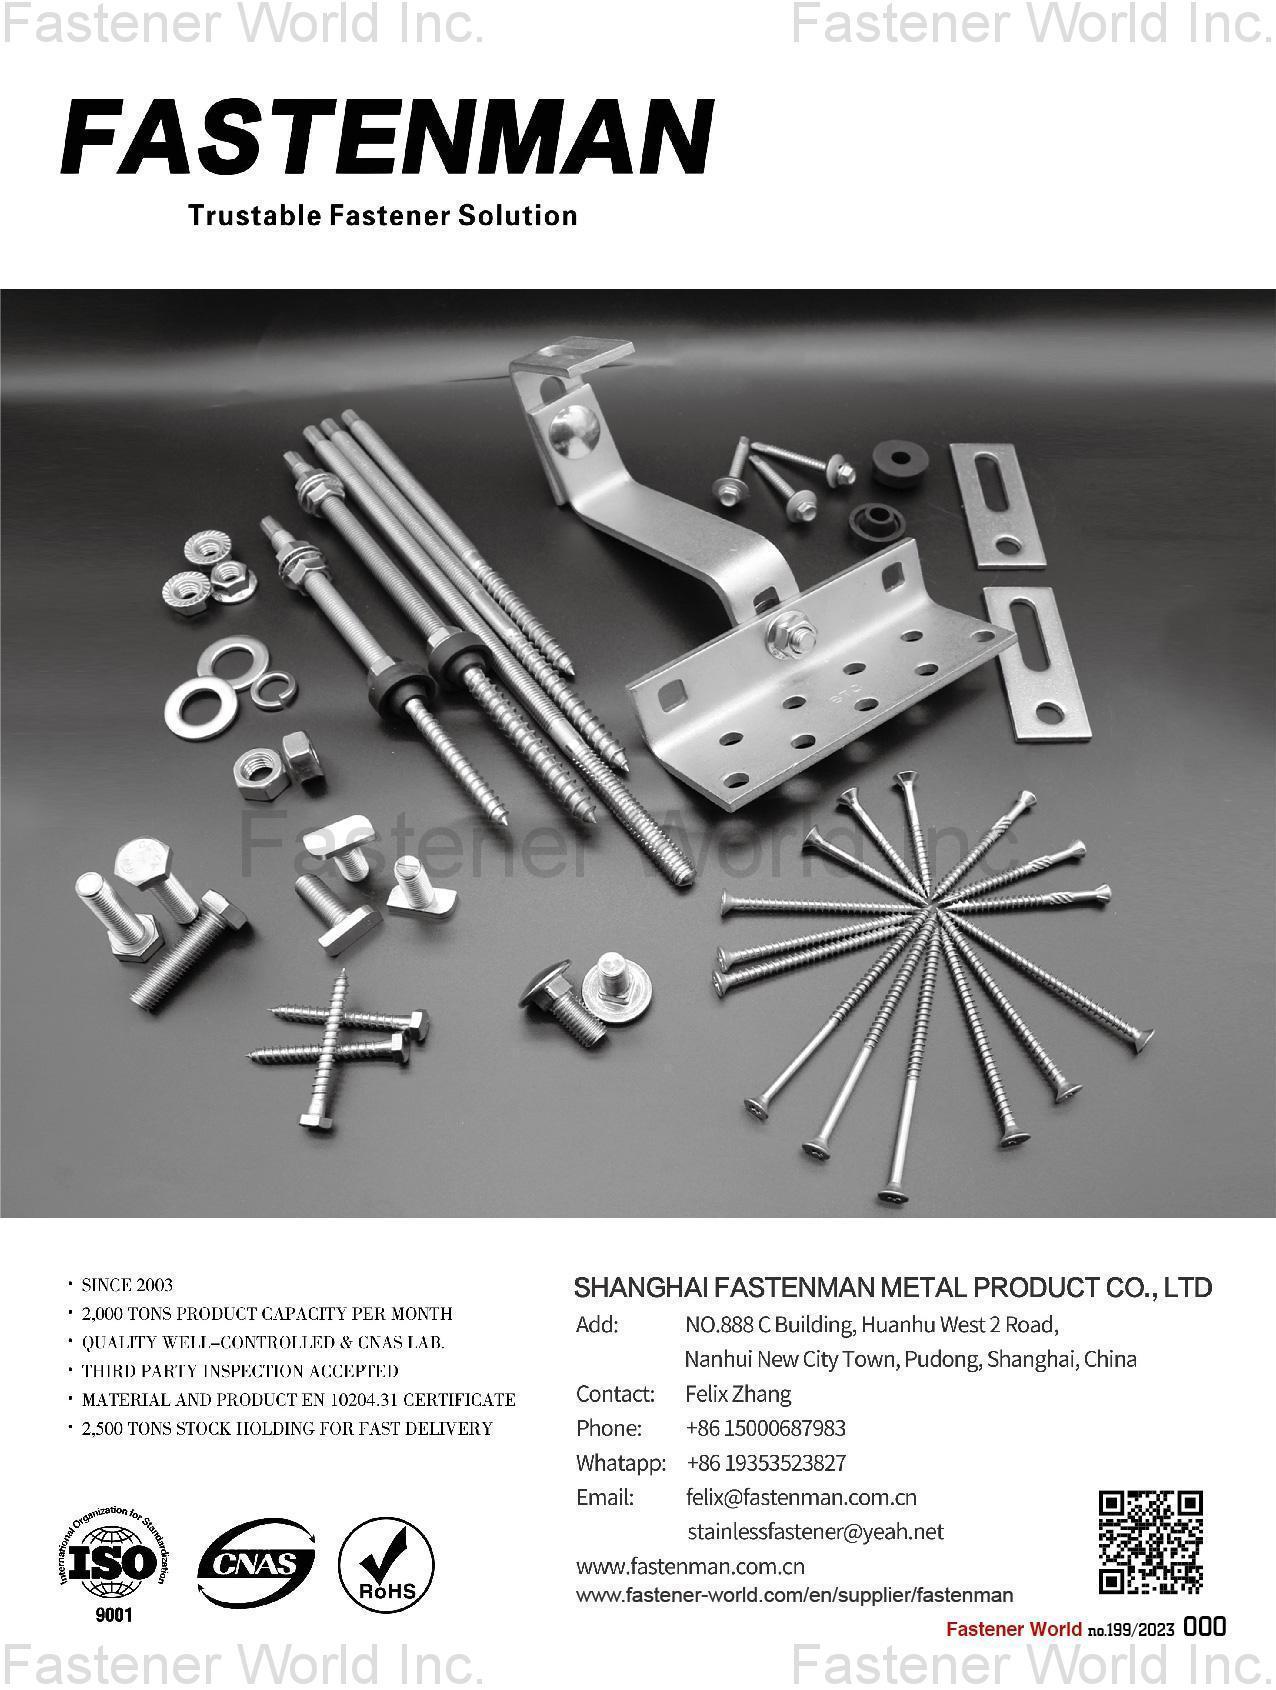 SHANGHAI FASTENMAN METAL PRODUCT CO., LTD. , Solar: Dowel Screws with Flange Nuts and EPDM, Solar Hook  Standard: Washers, Rods, Screws, Nuts, Bolts